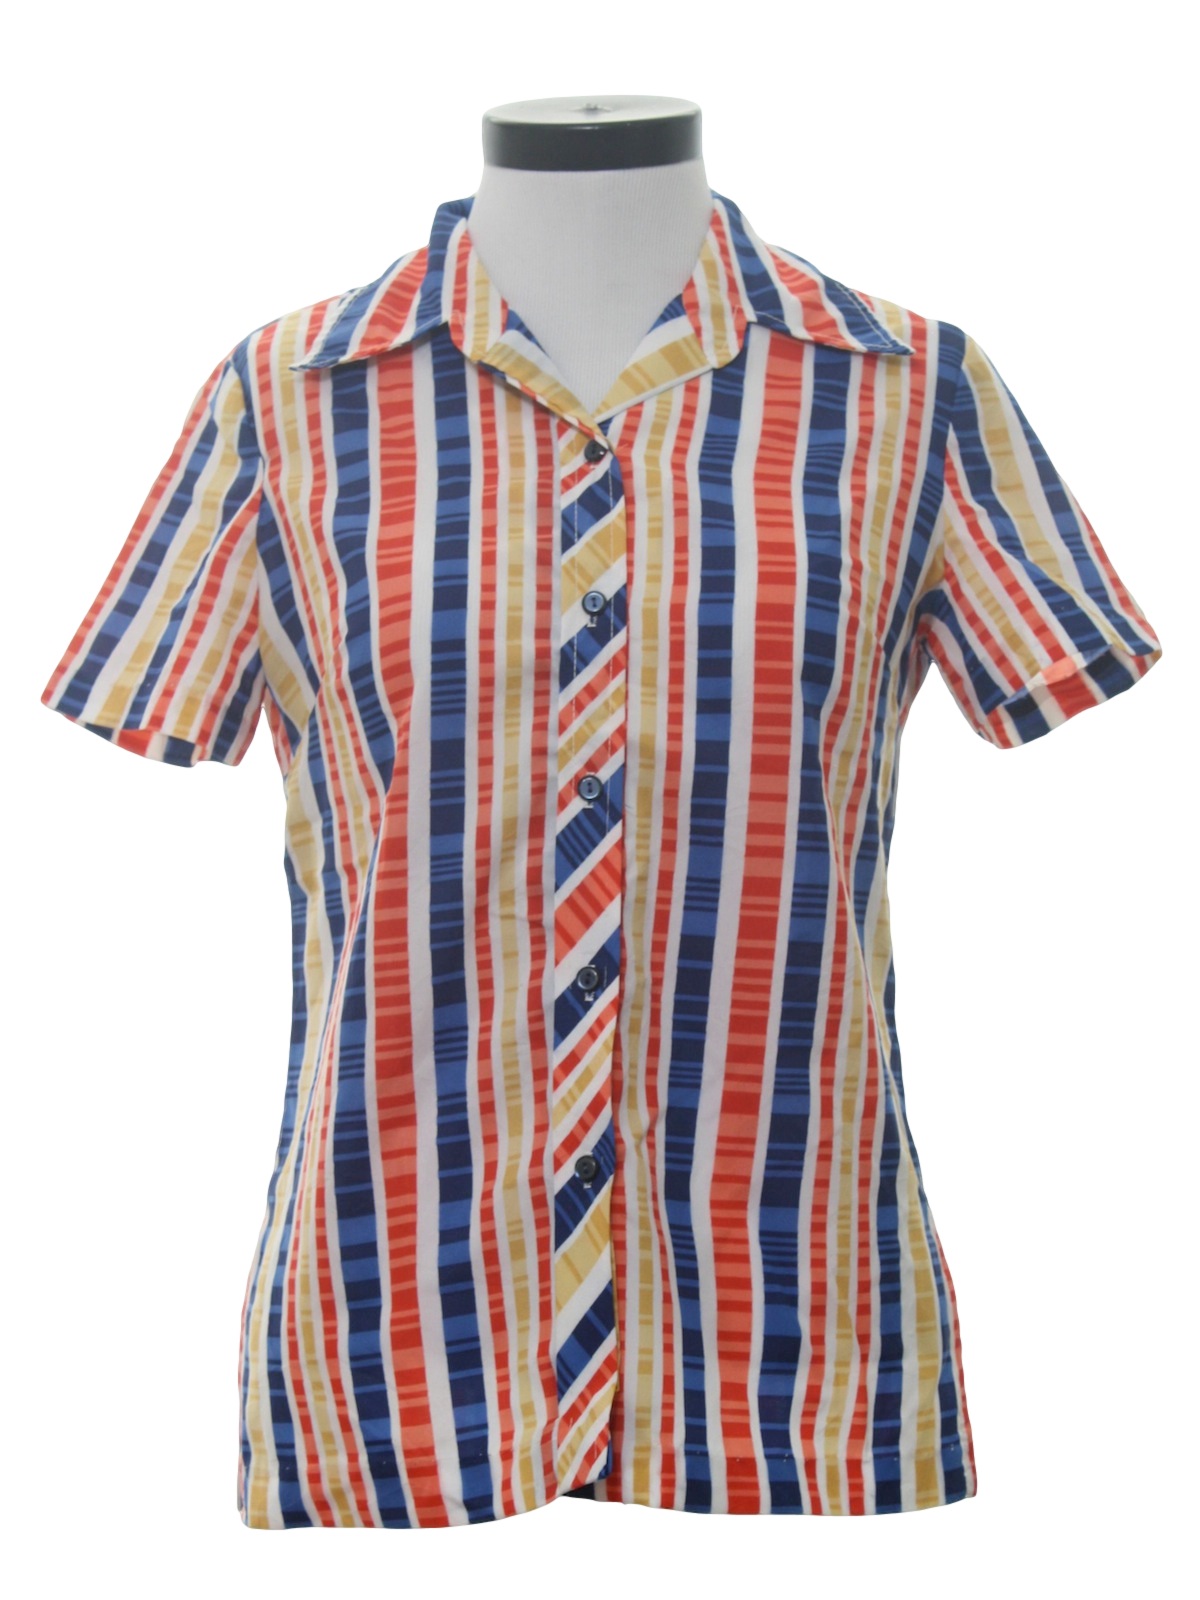 Seventies Alex Coleman Shirt: Late 70s or early 80s -Alex Coleman ...